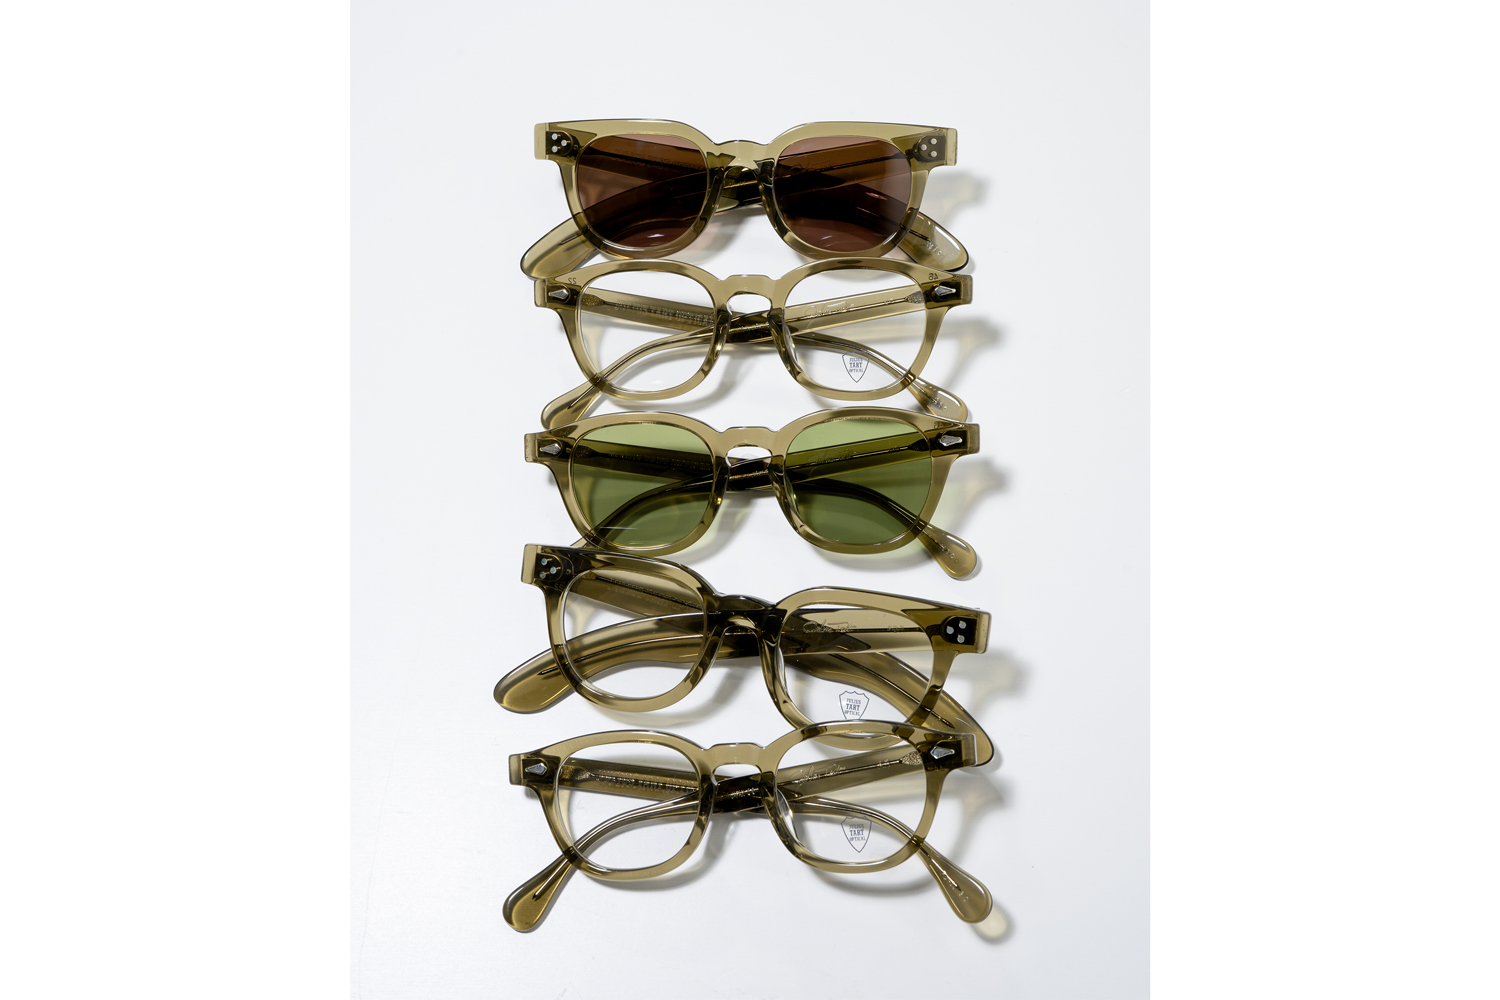 JULIUS TART OPTICAL for Continuer｜FDR SG - OLIVE / LIMITED - CHOCO BROWN｜JULIUS TART OPTICAL